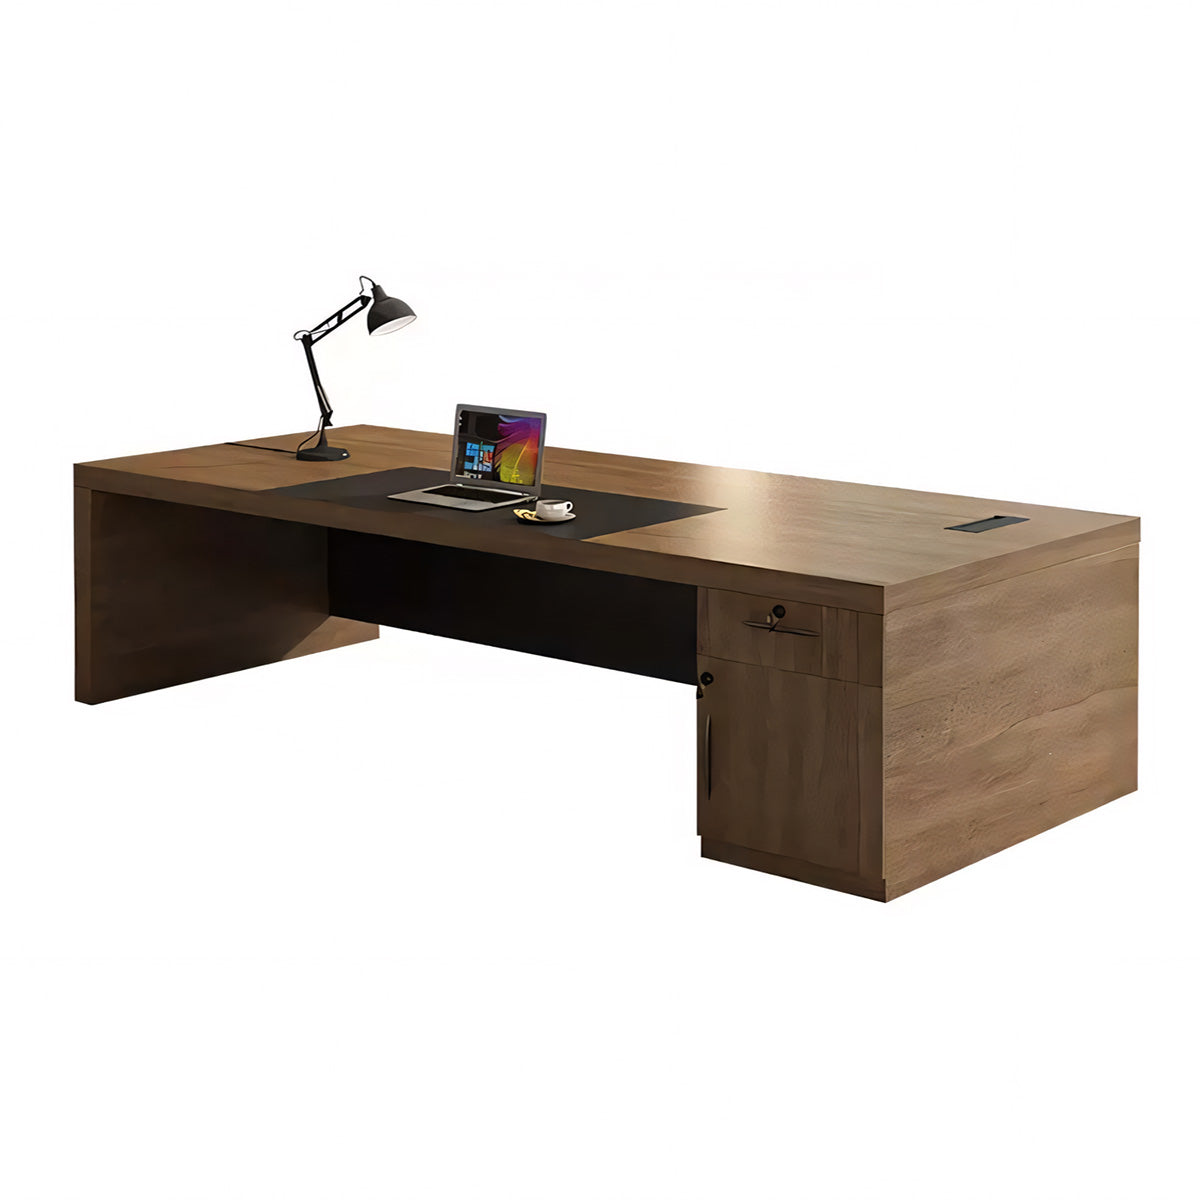 Minimalist Executive Office Desk and Chair Combination